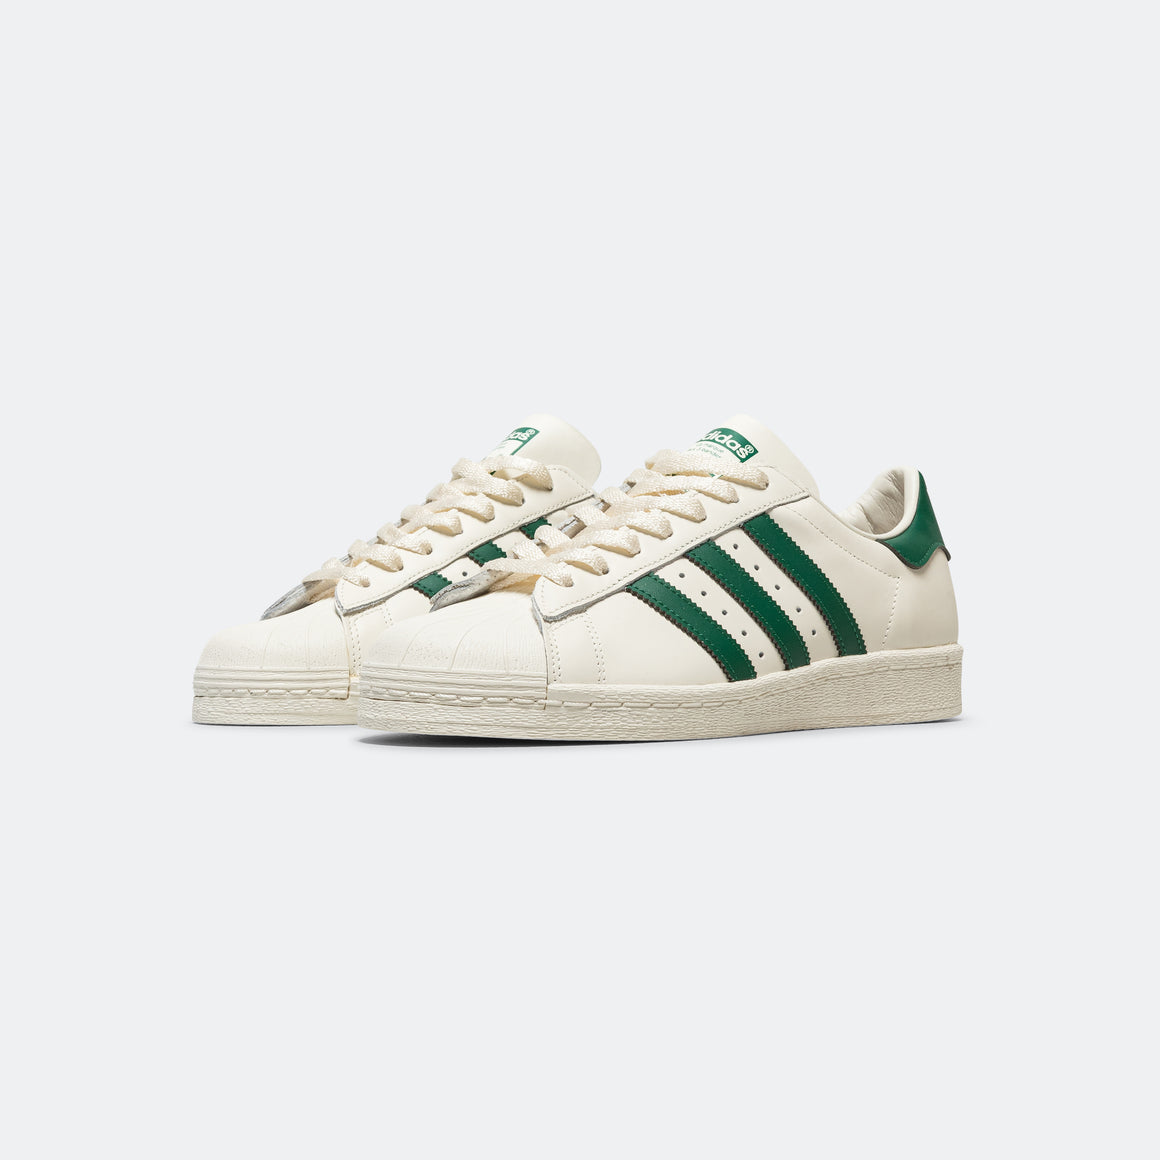 adidas - Superstar 82 - Cloud White/Dark Green-Off White - UP THERE